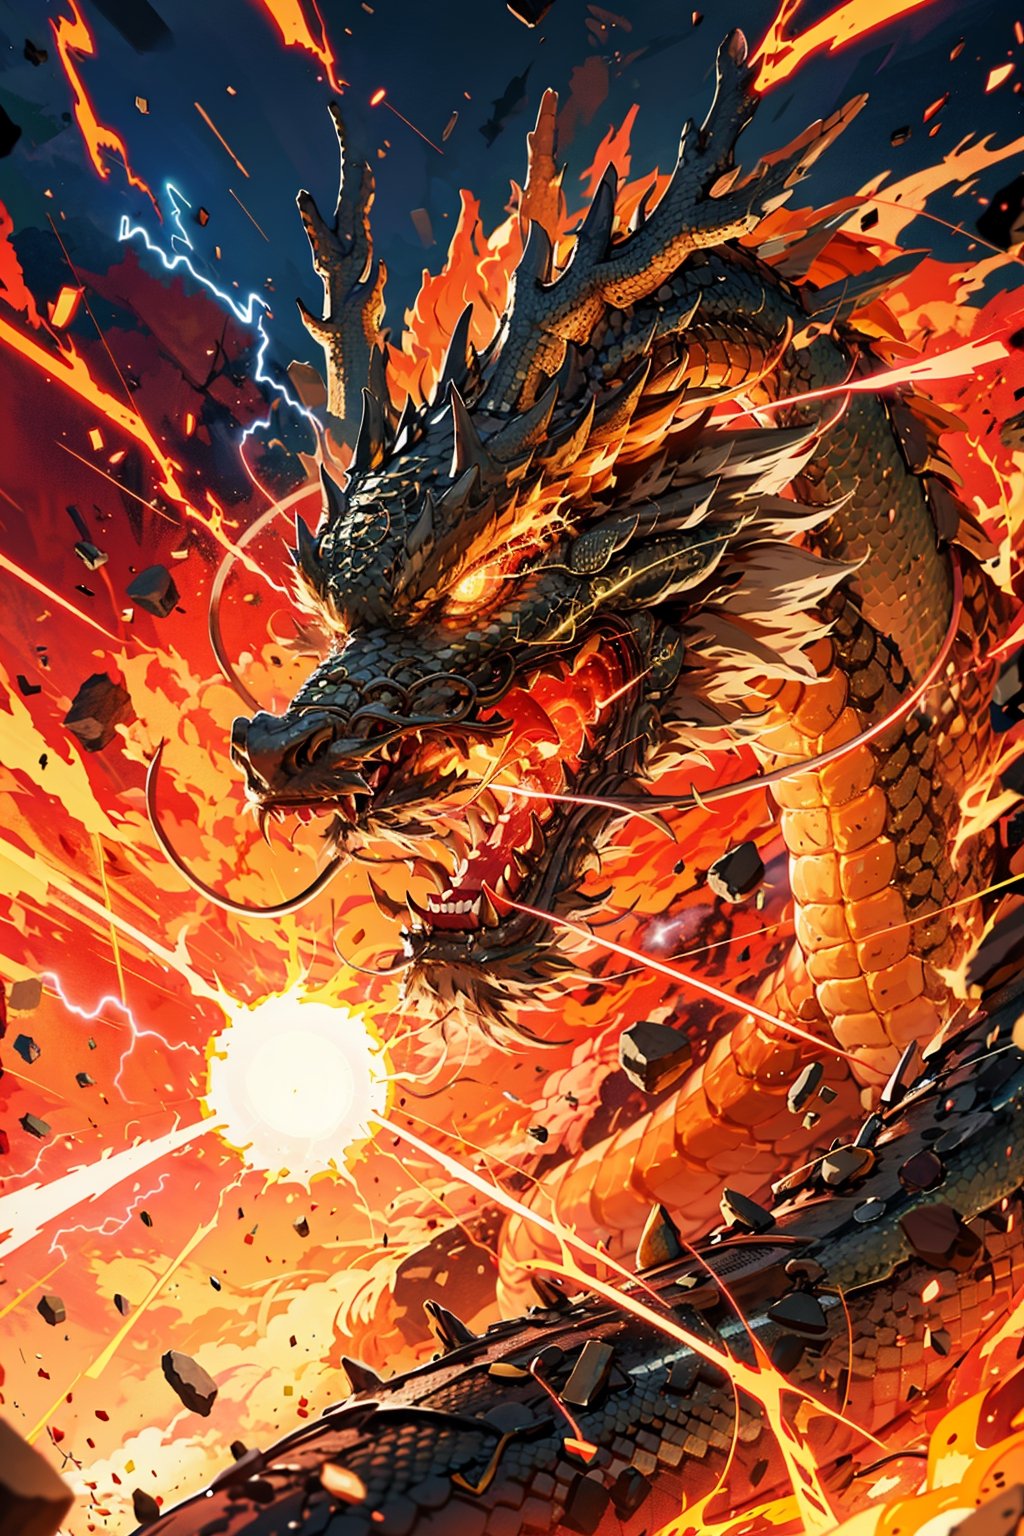 eastern dragon, destruction, open mouth, glowing, electricity, fire, glowing eyes, horns, scales, teeth, energy cannon, lightning